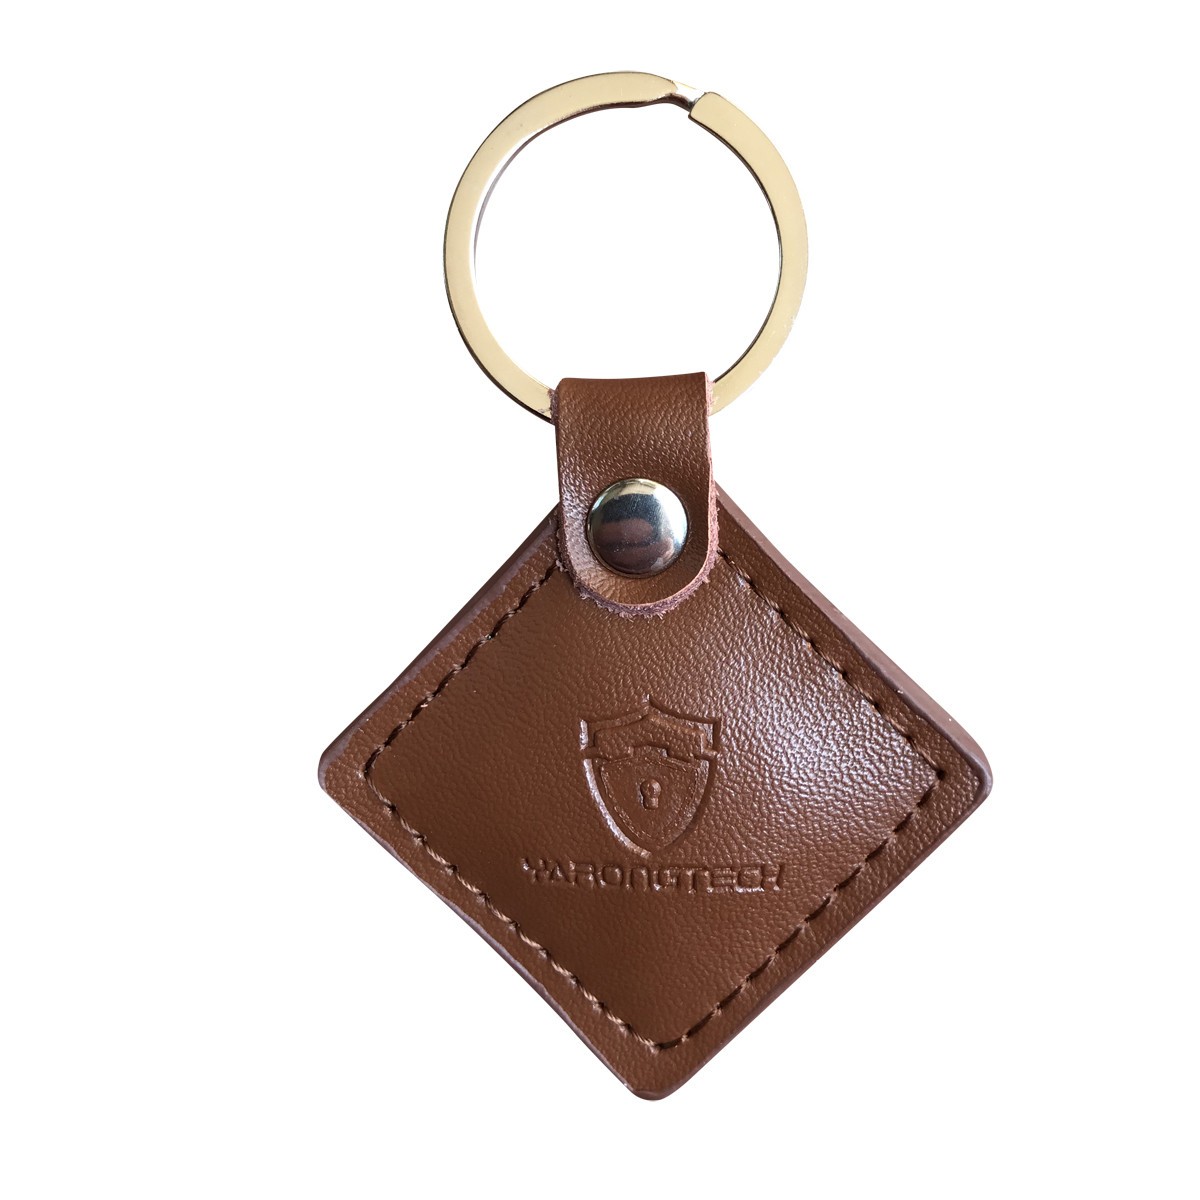 125KHz RFID Writable Key T5577 Brown Leather (Pack of 2)